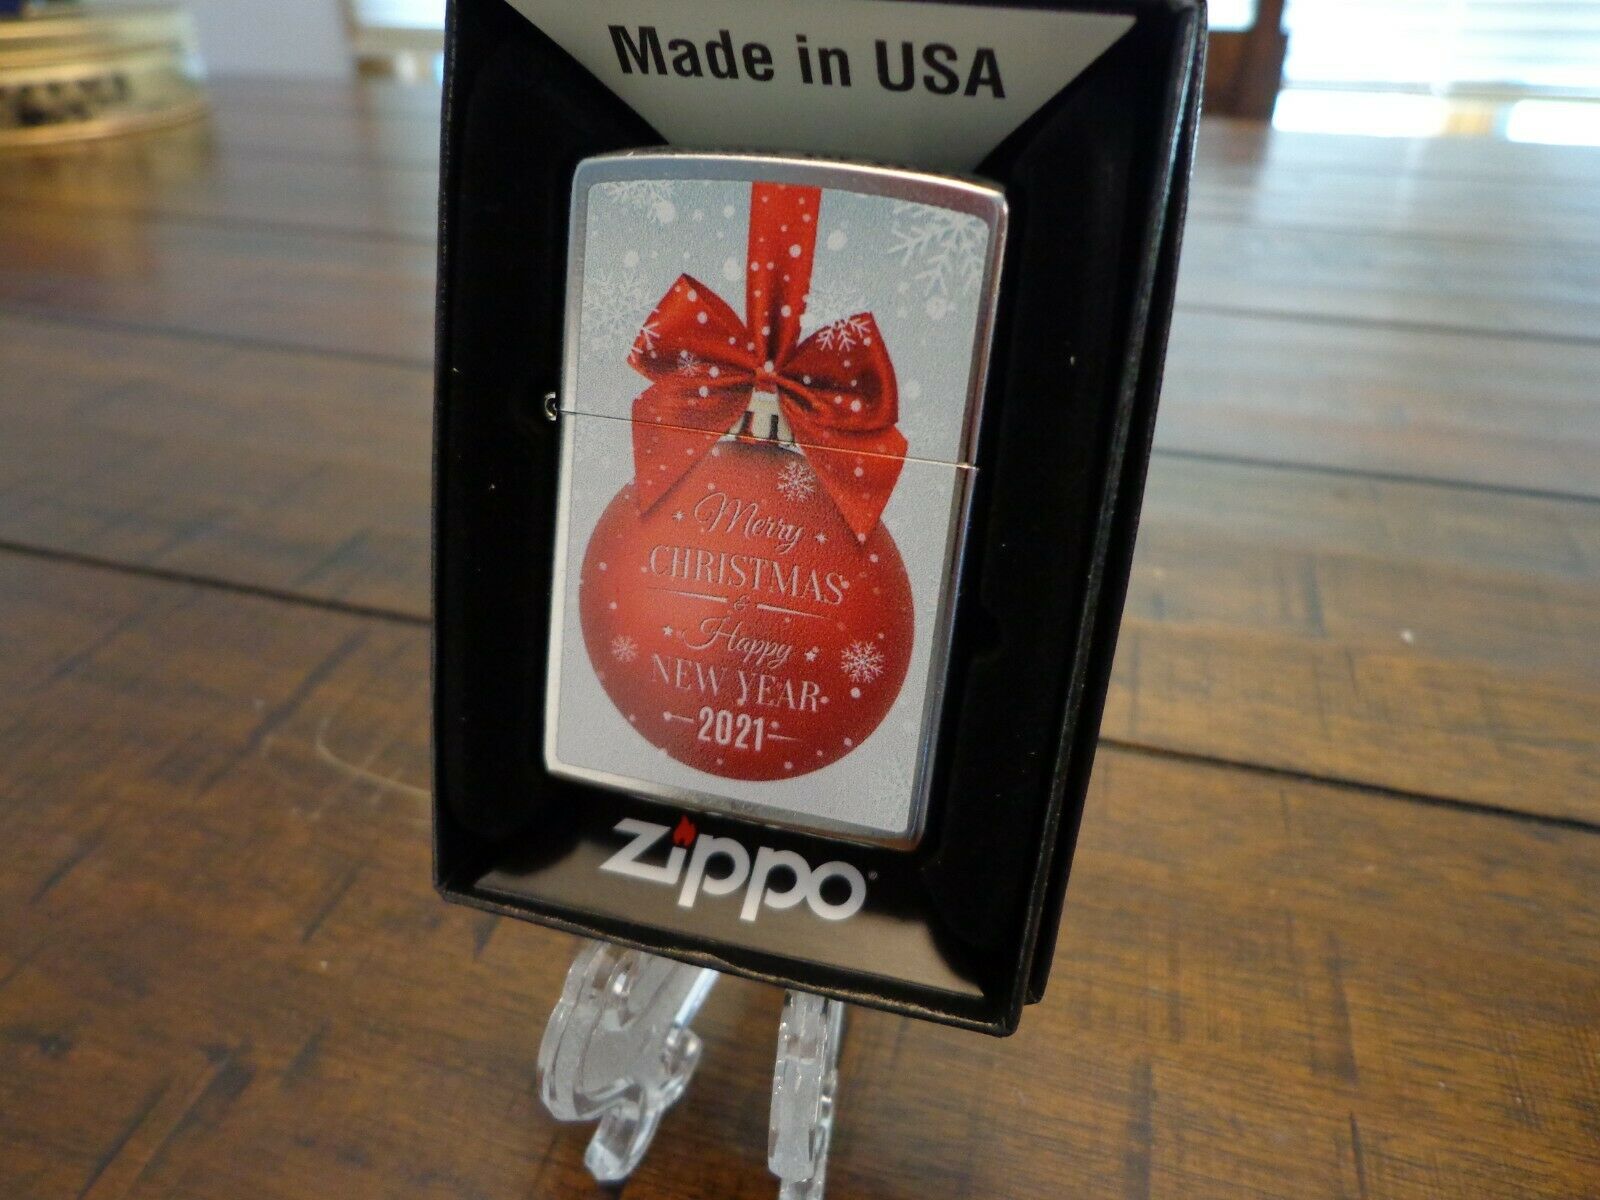 Merry Christmas & Happy New Year Ornament 2021 Zippo Lighter Mint In Box